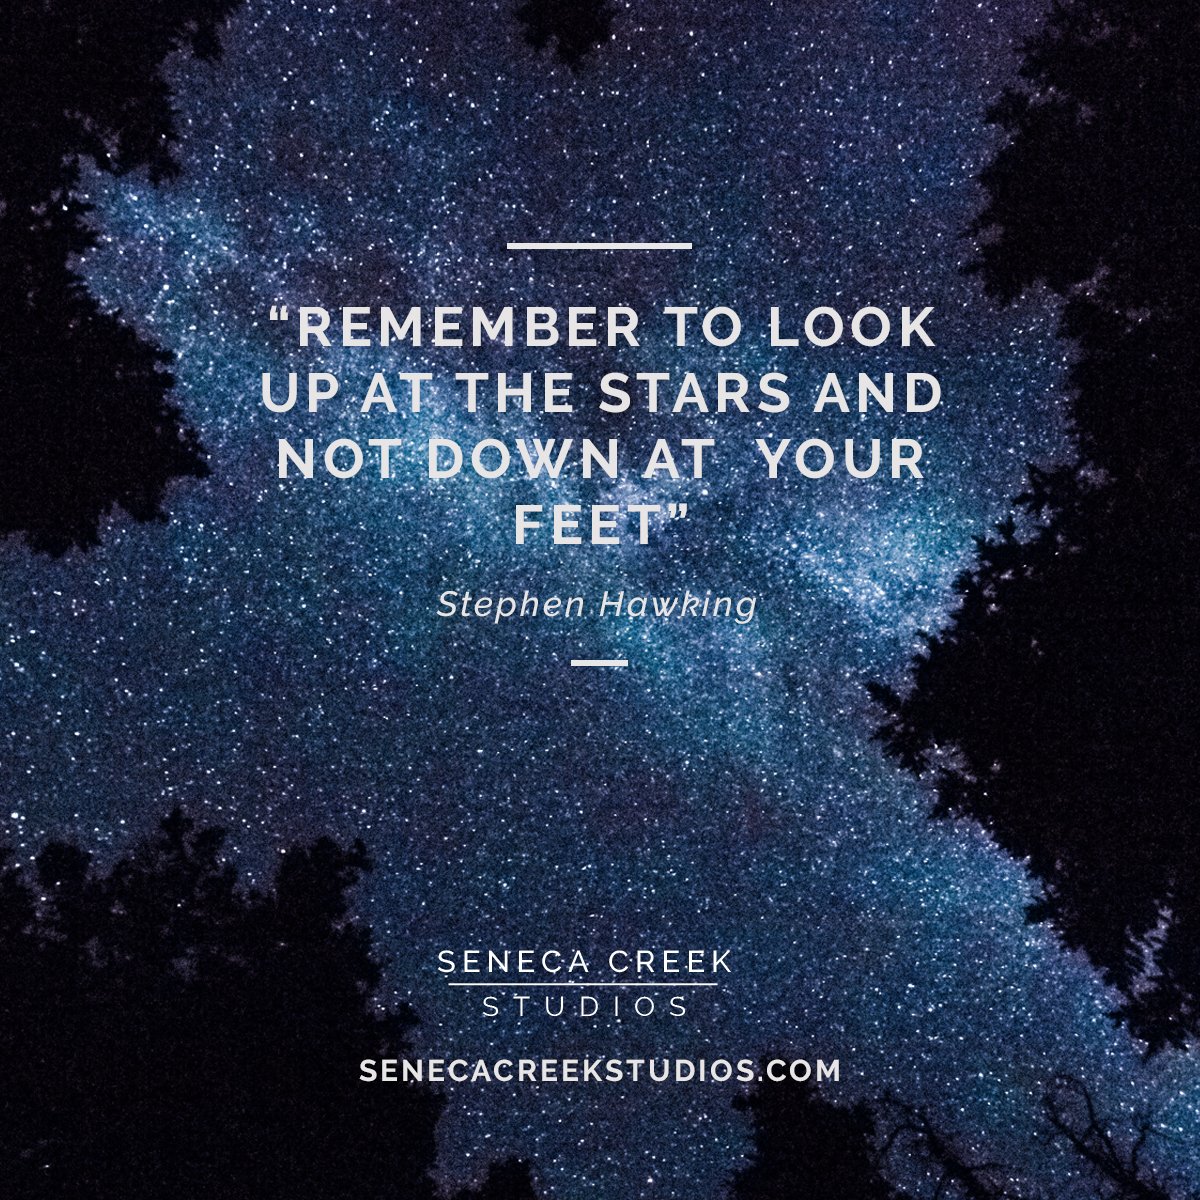 Seneca Creek Studios En Twitter Remember To Look Up At The Stars And Not Down At Your Feet Stephen Hawking Inspirationalquotes Astrophotography Stars Stephenhawking T Co Miezbzand6 Twitter